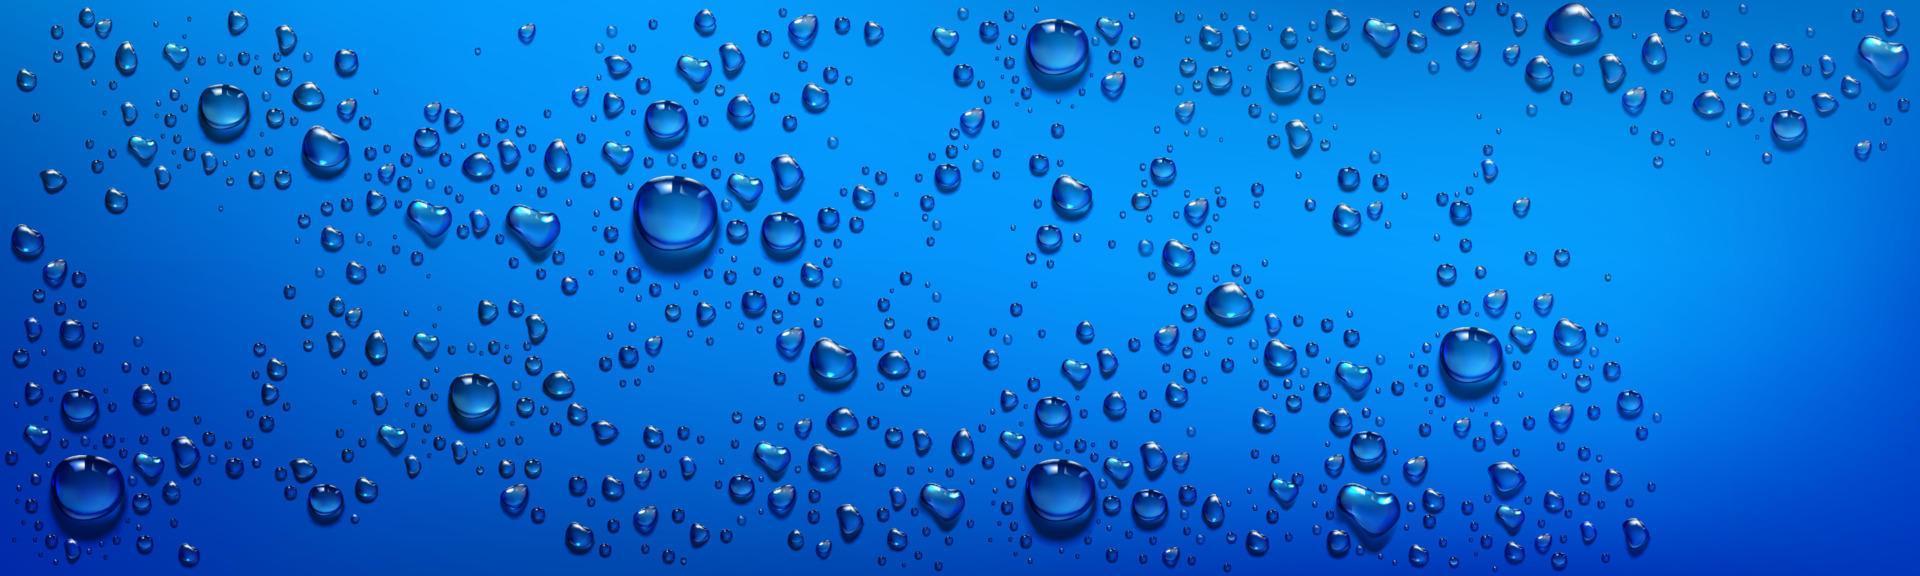 Blue background with clear water droplets vector